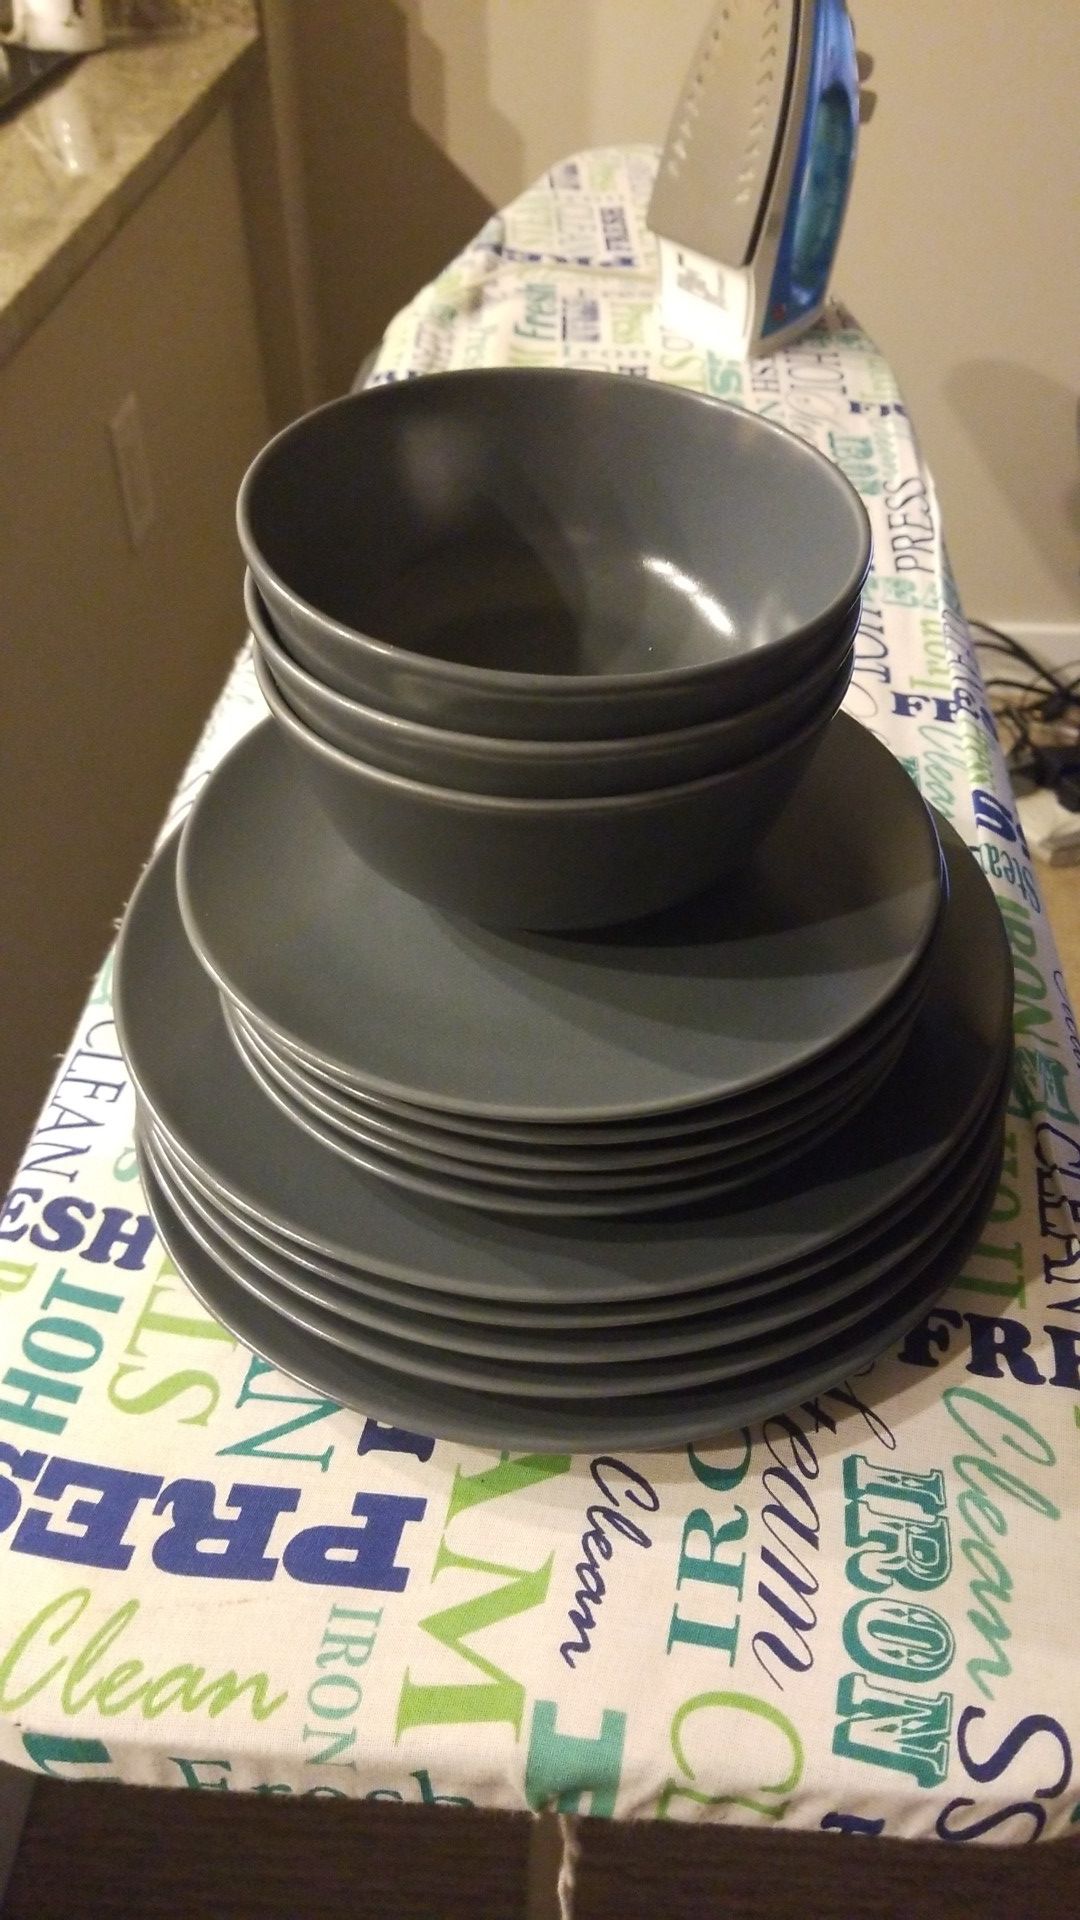 FREE - Plates and bowls